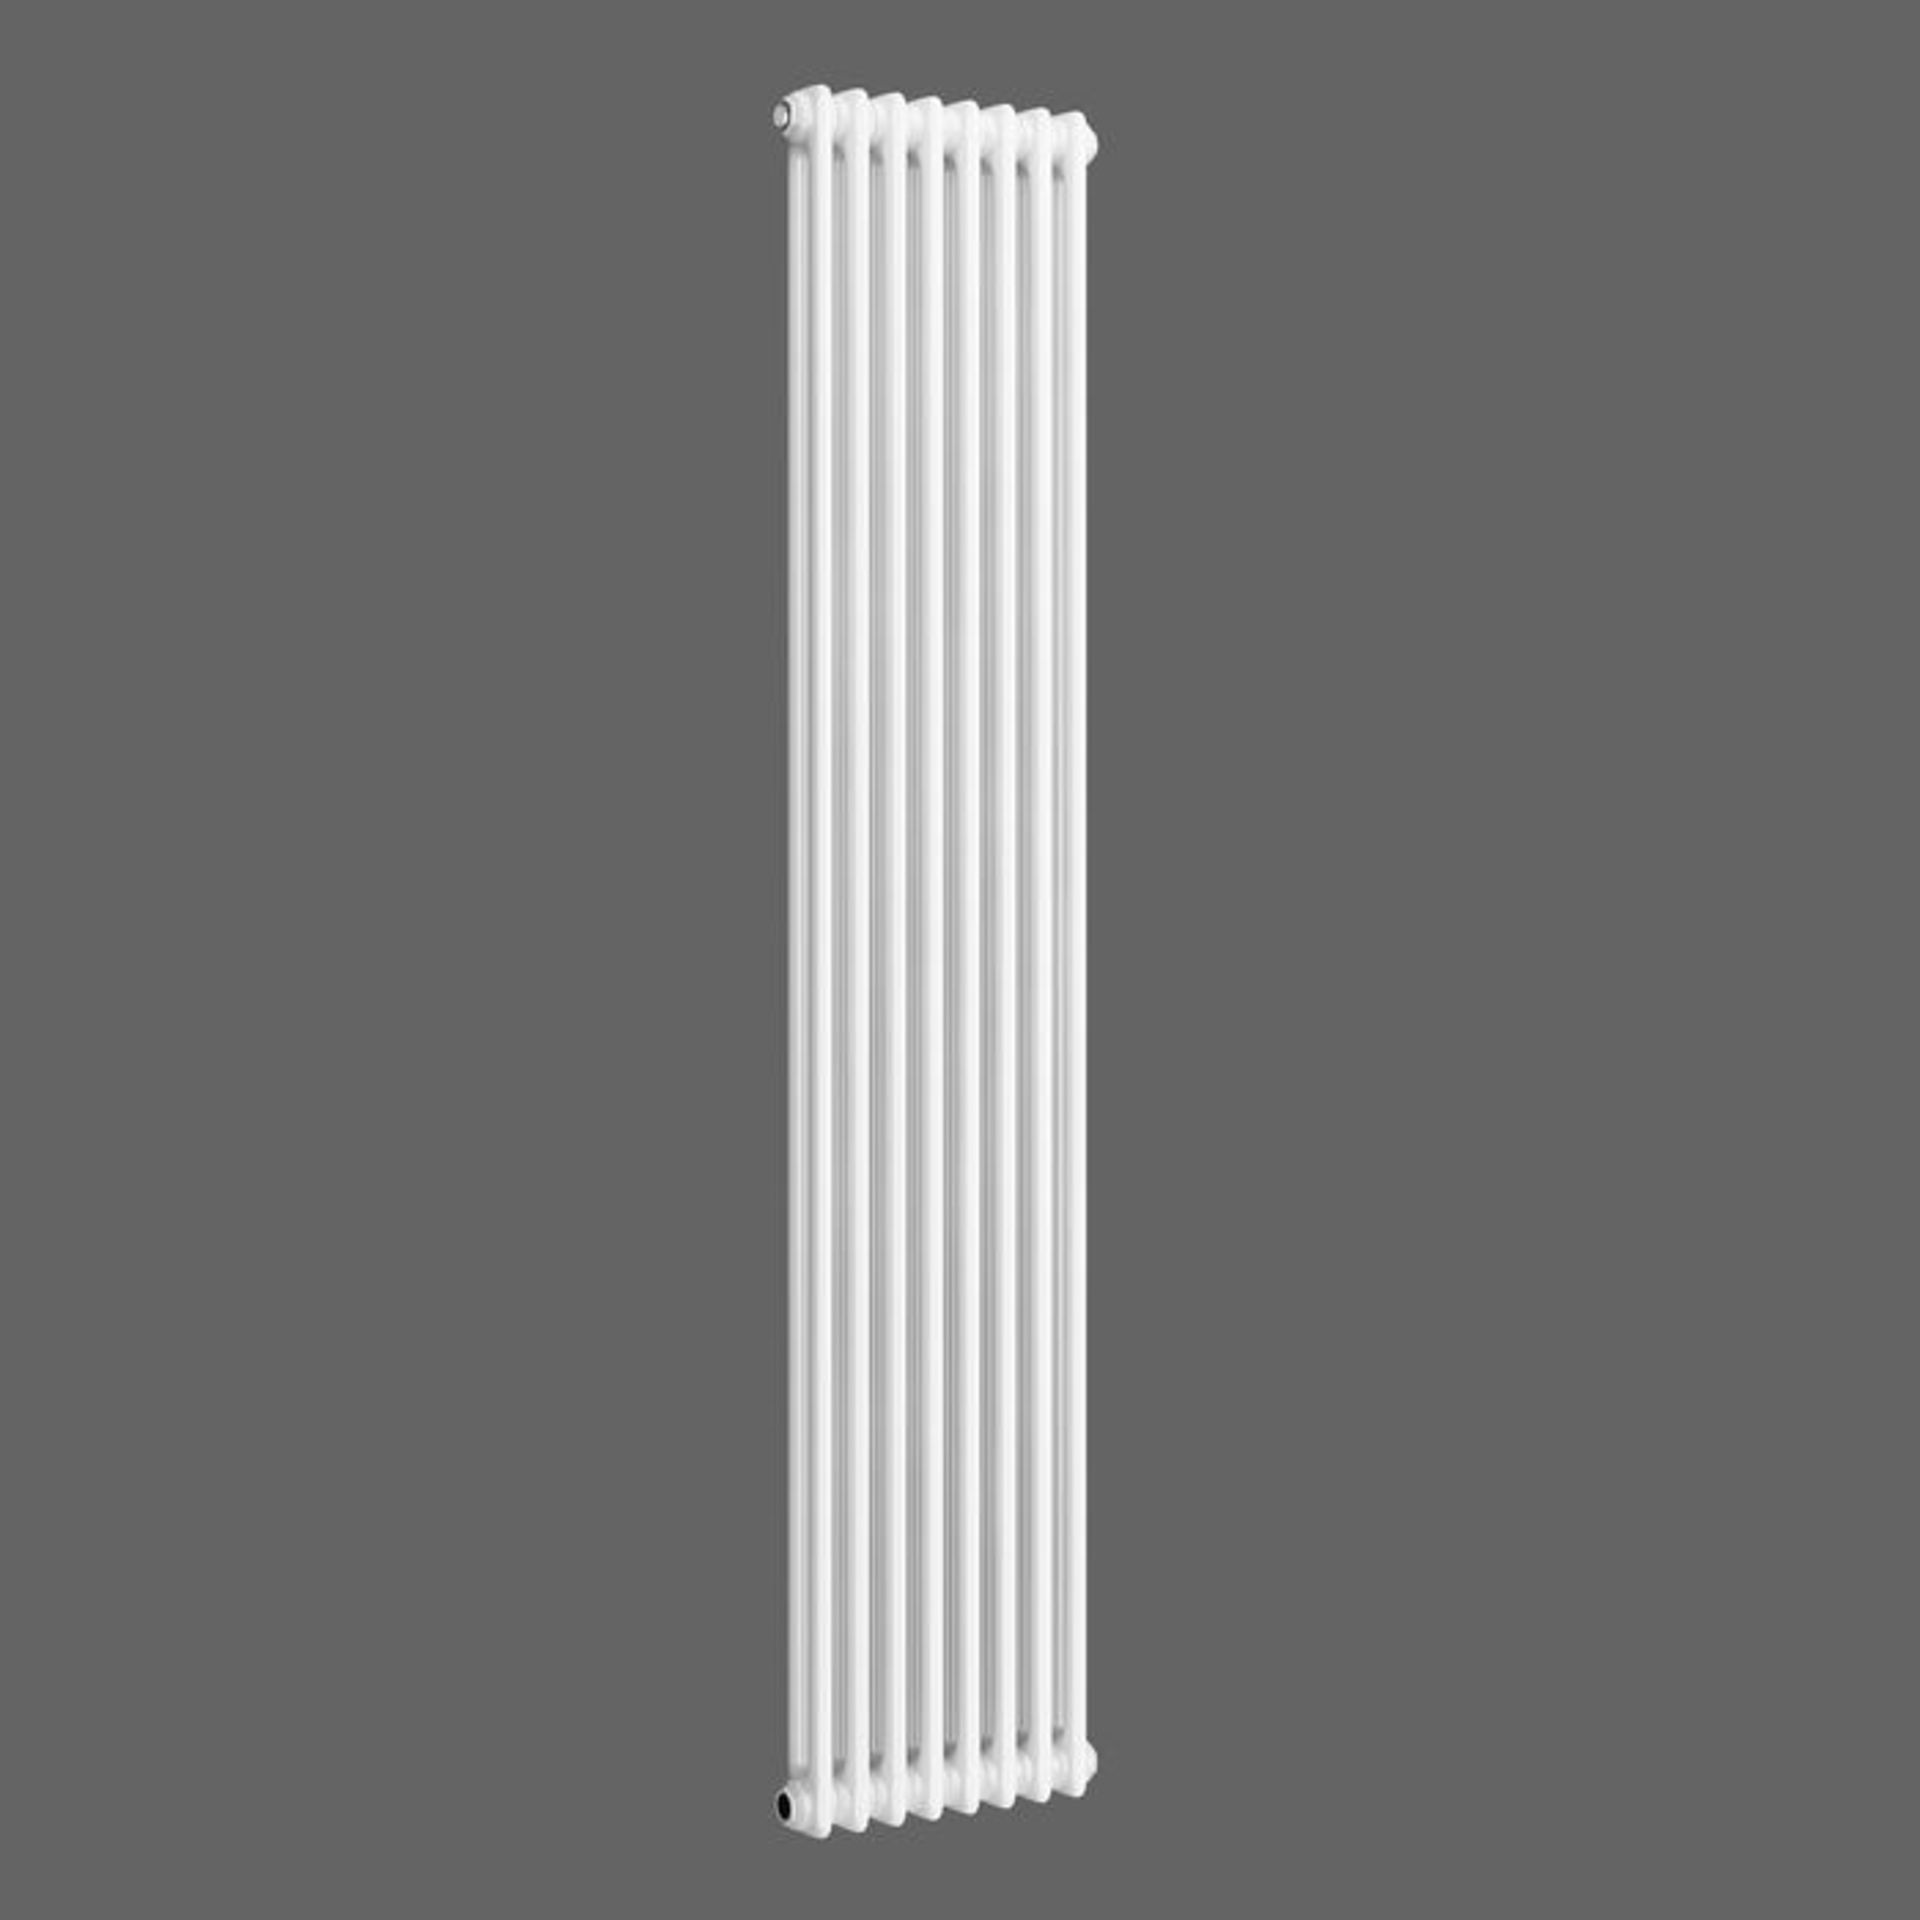 (OS285) 1800x380mm White Double Panel Vertical Colosseum Traditional Radiator. RRP £408.99. Made - Image 3 of 3